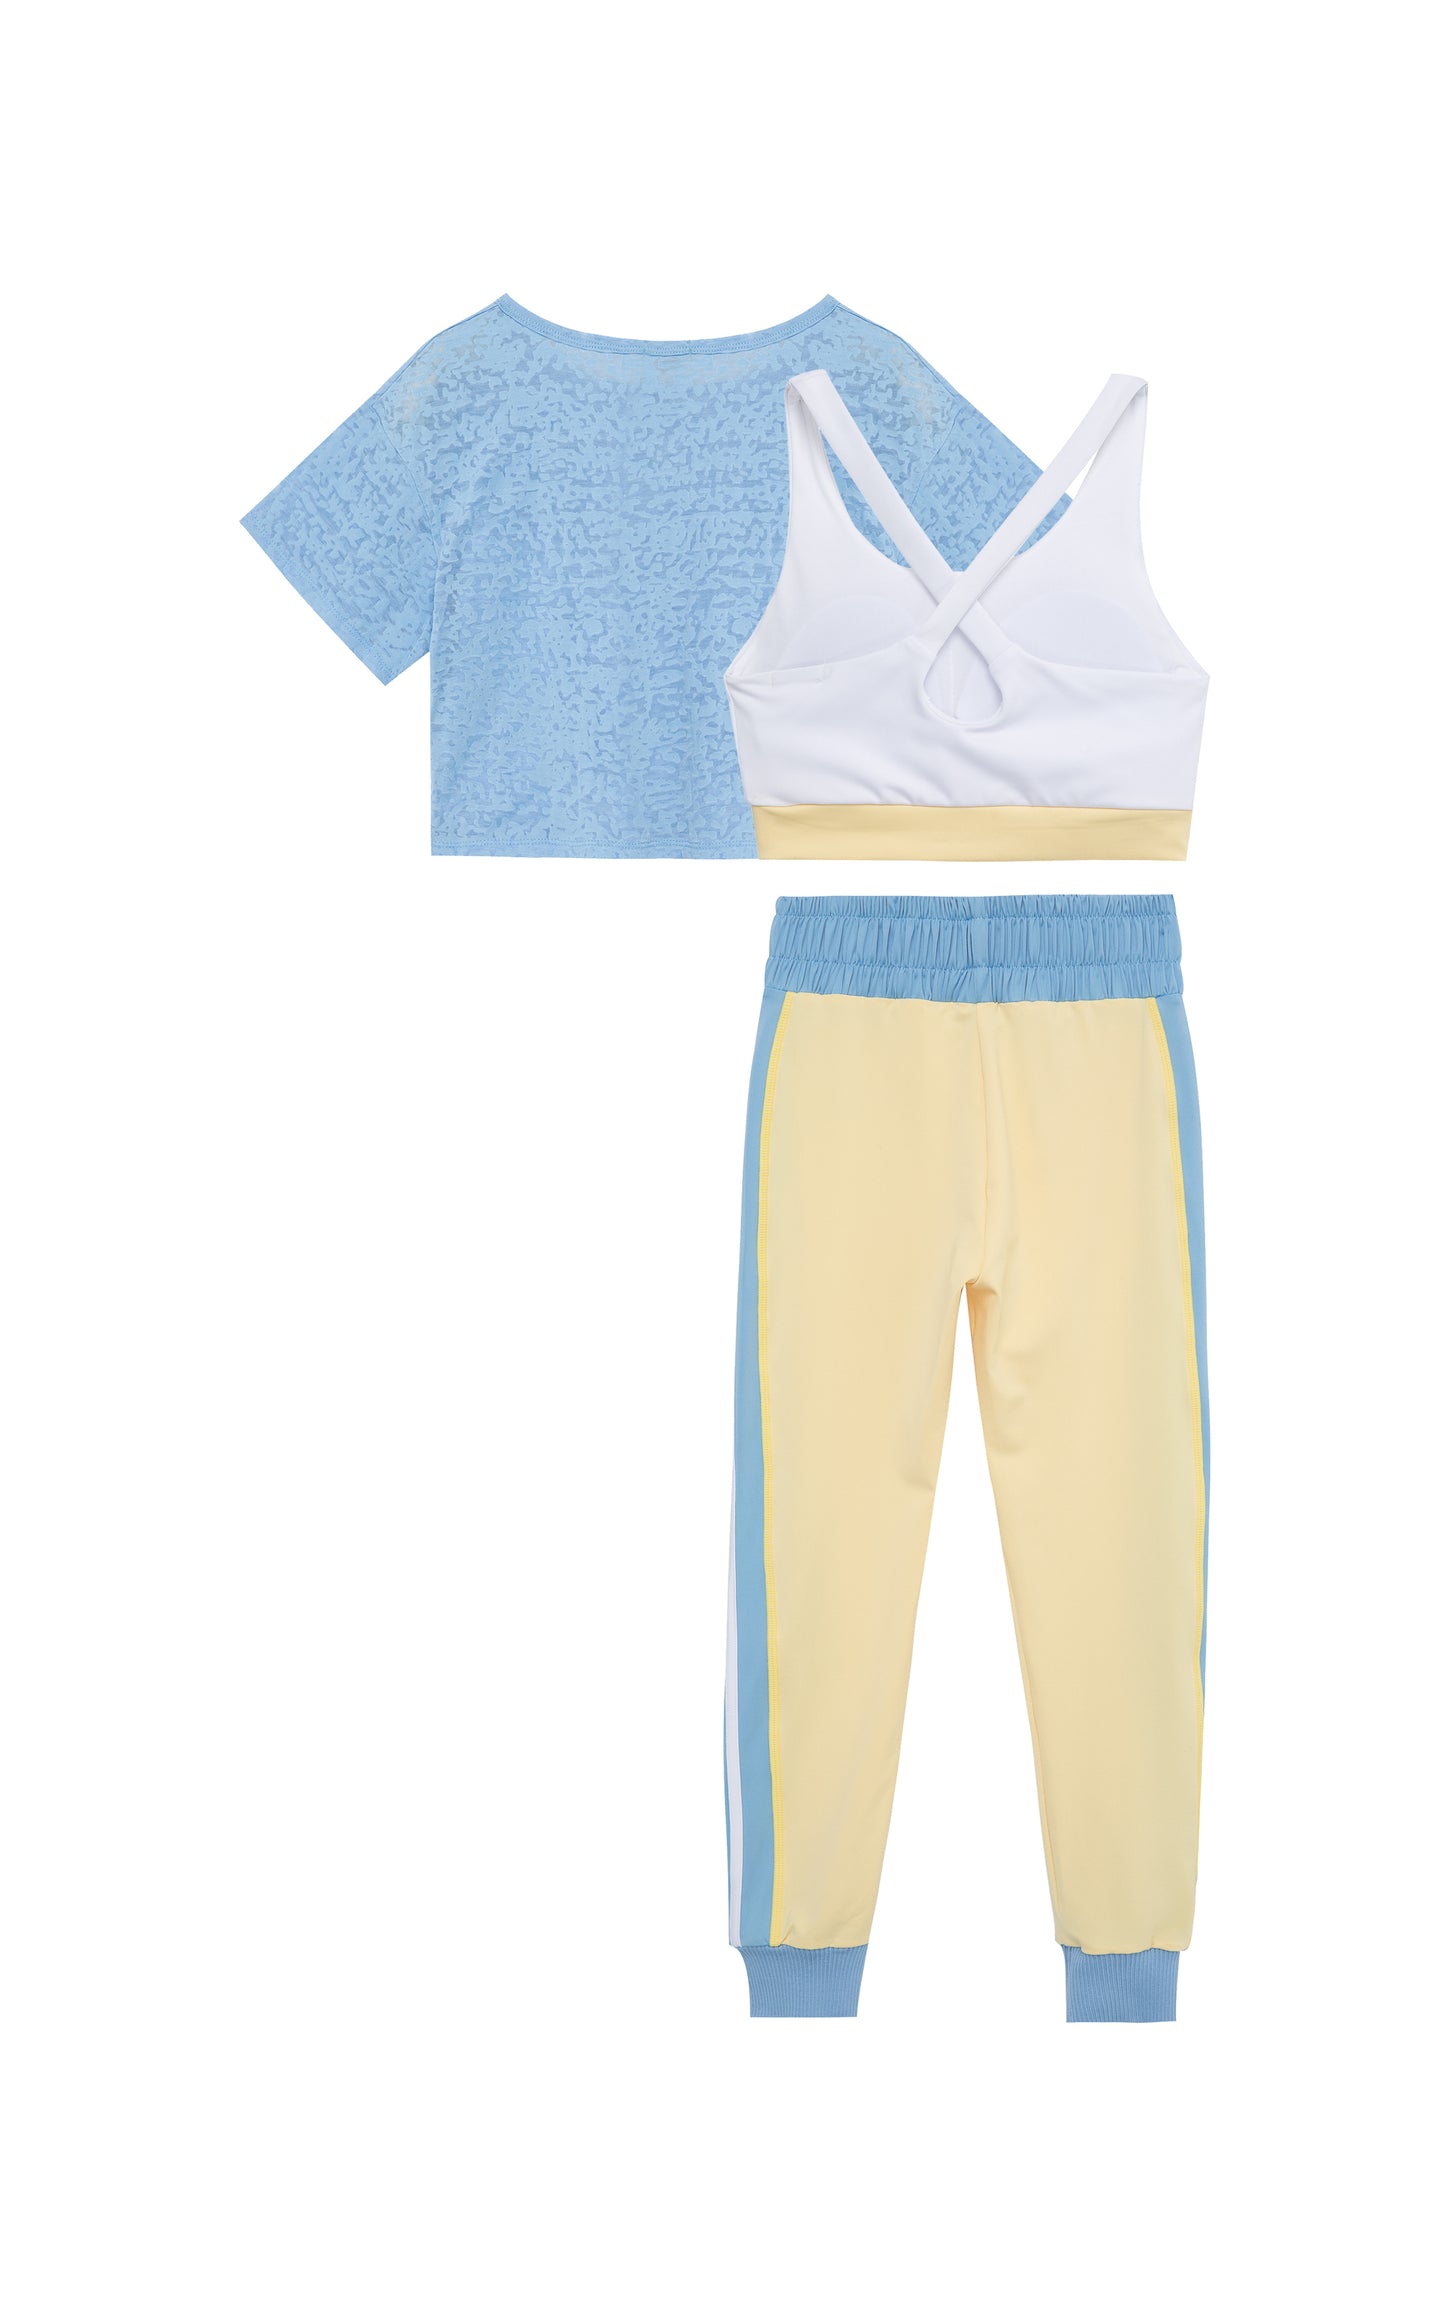 Back of three-piece active set including baby blue shirt, white tank top with yellow bottom trim, and baby-blue-and-yellow leggings with white stripes